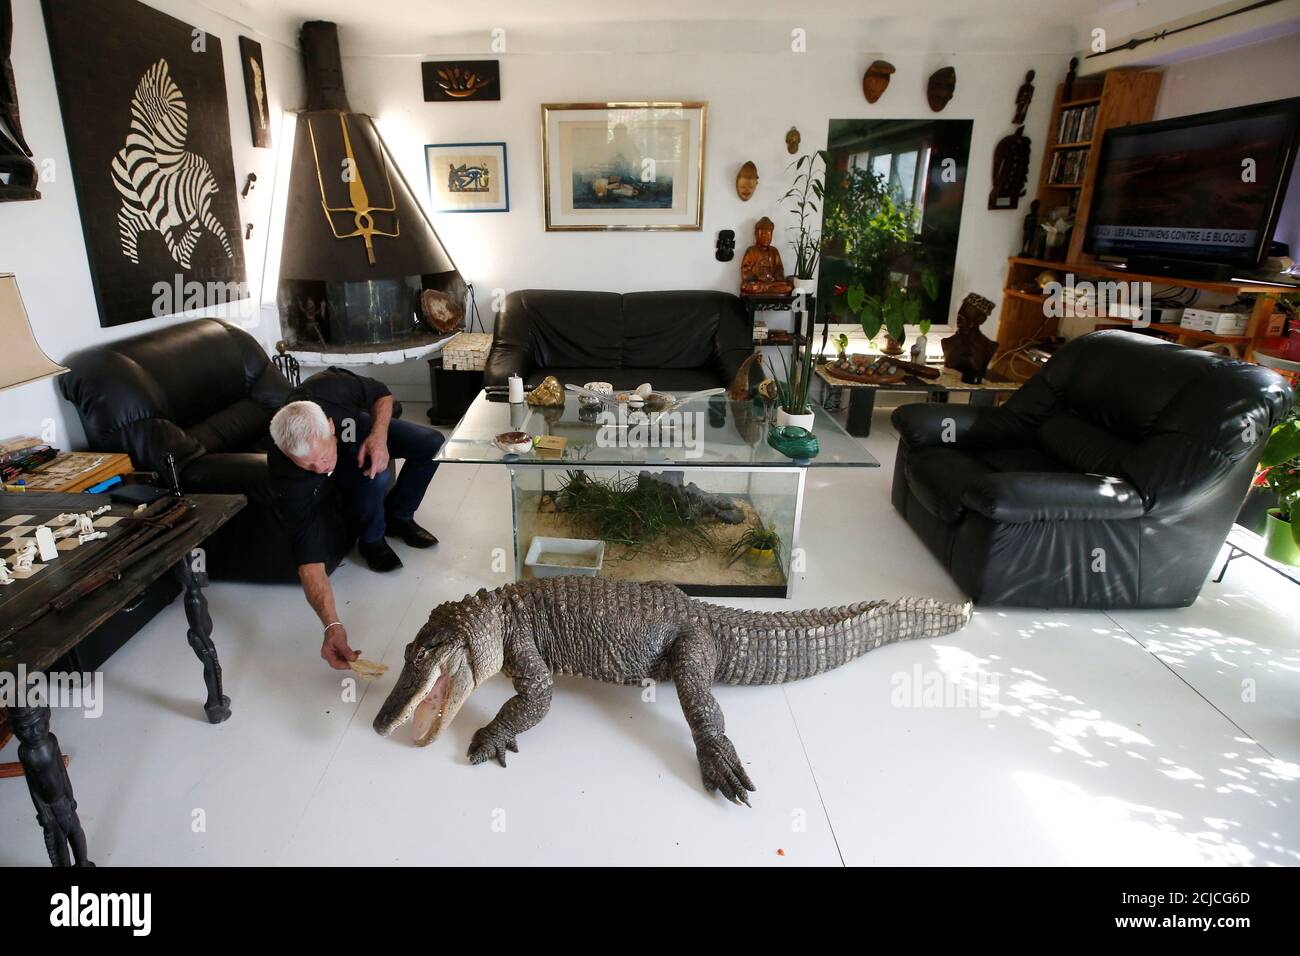 Philippe Gillet, 67 year-old Frenchman who lives with more than 400 reptiles  and tamed alligators, gives chicken to his alligator Ali in his living room  in Coueron near Nantes, France September 19,